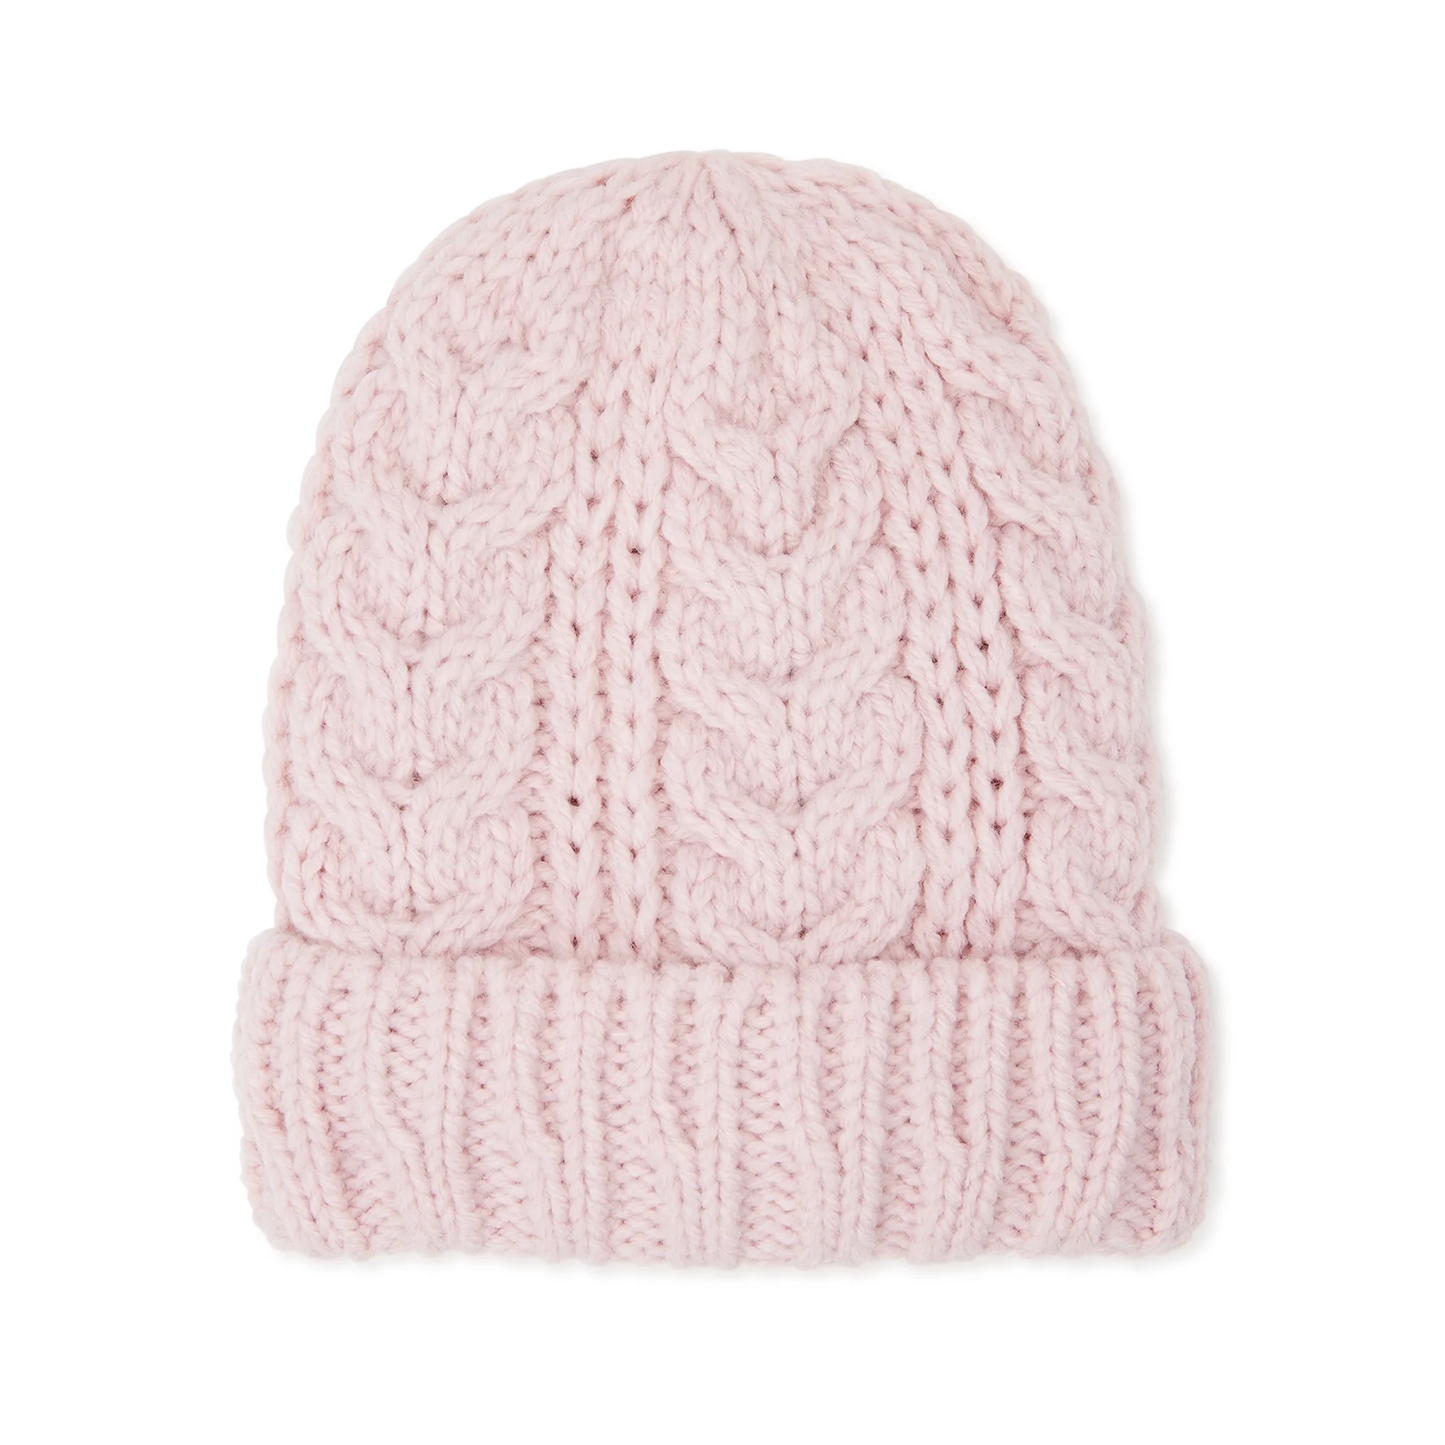 Women’s Lined Cable Knit Beanie Winter Hat ZB063